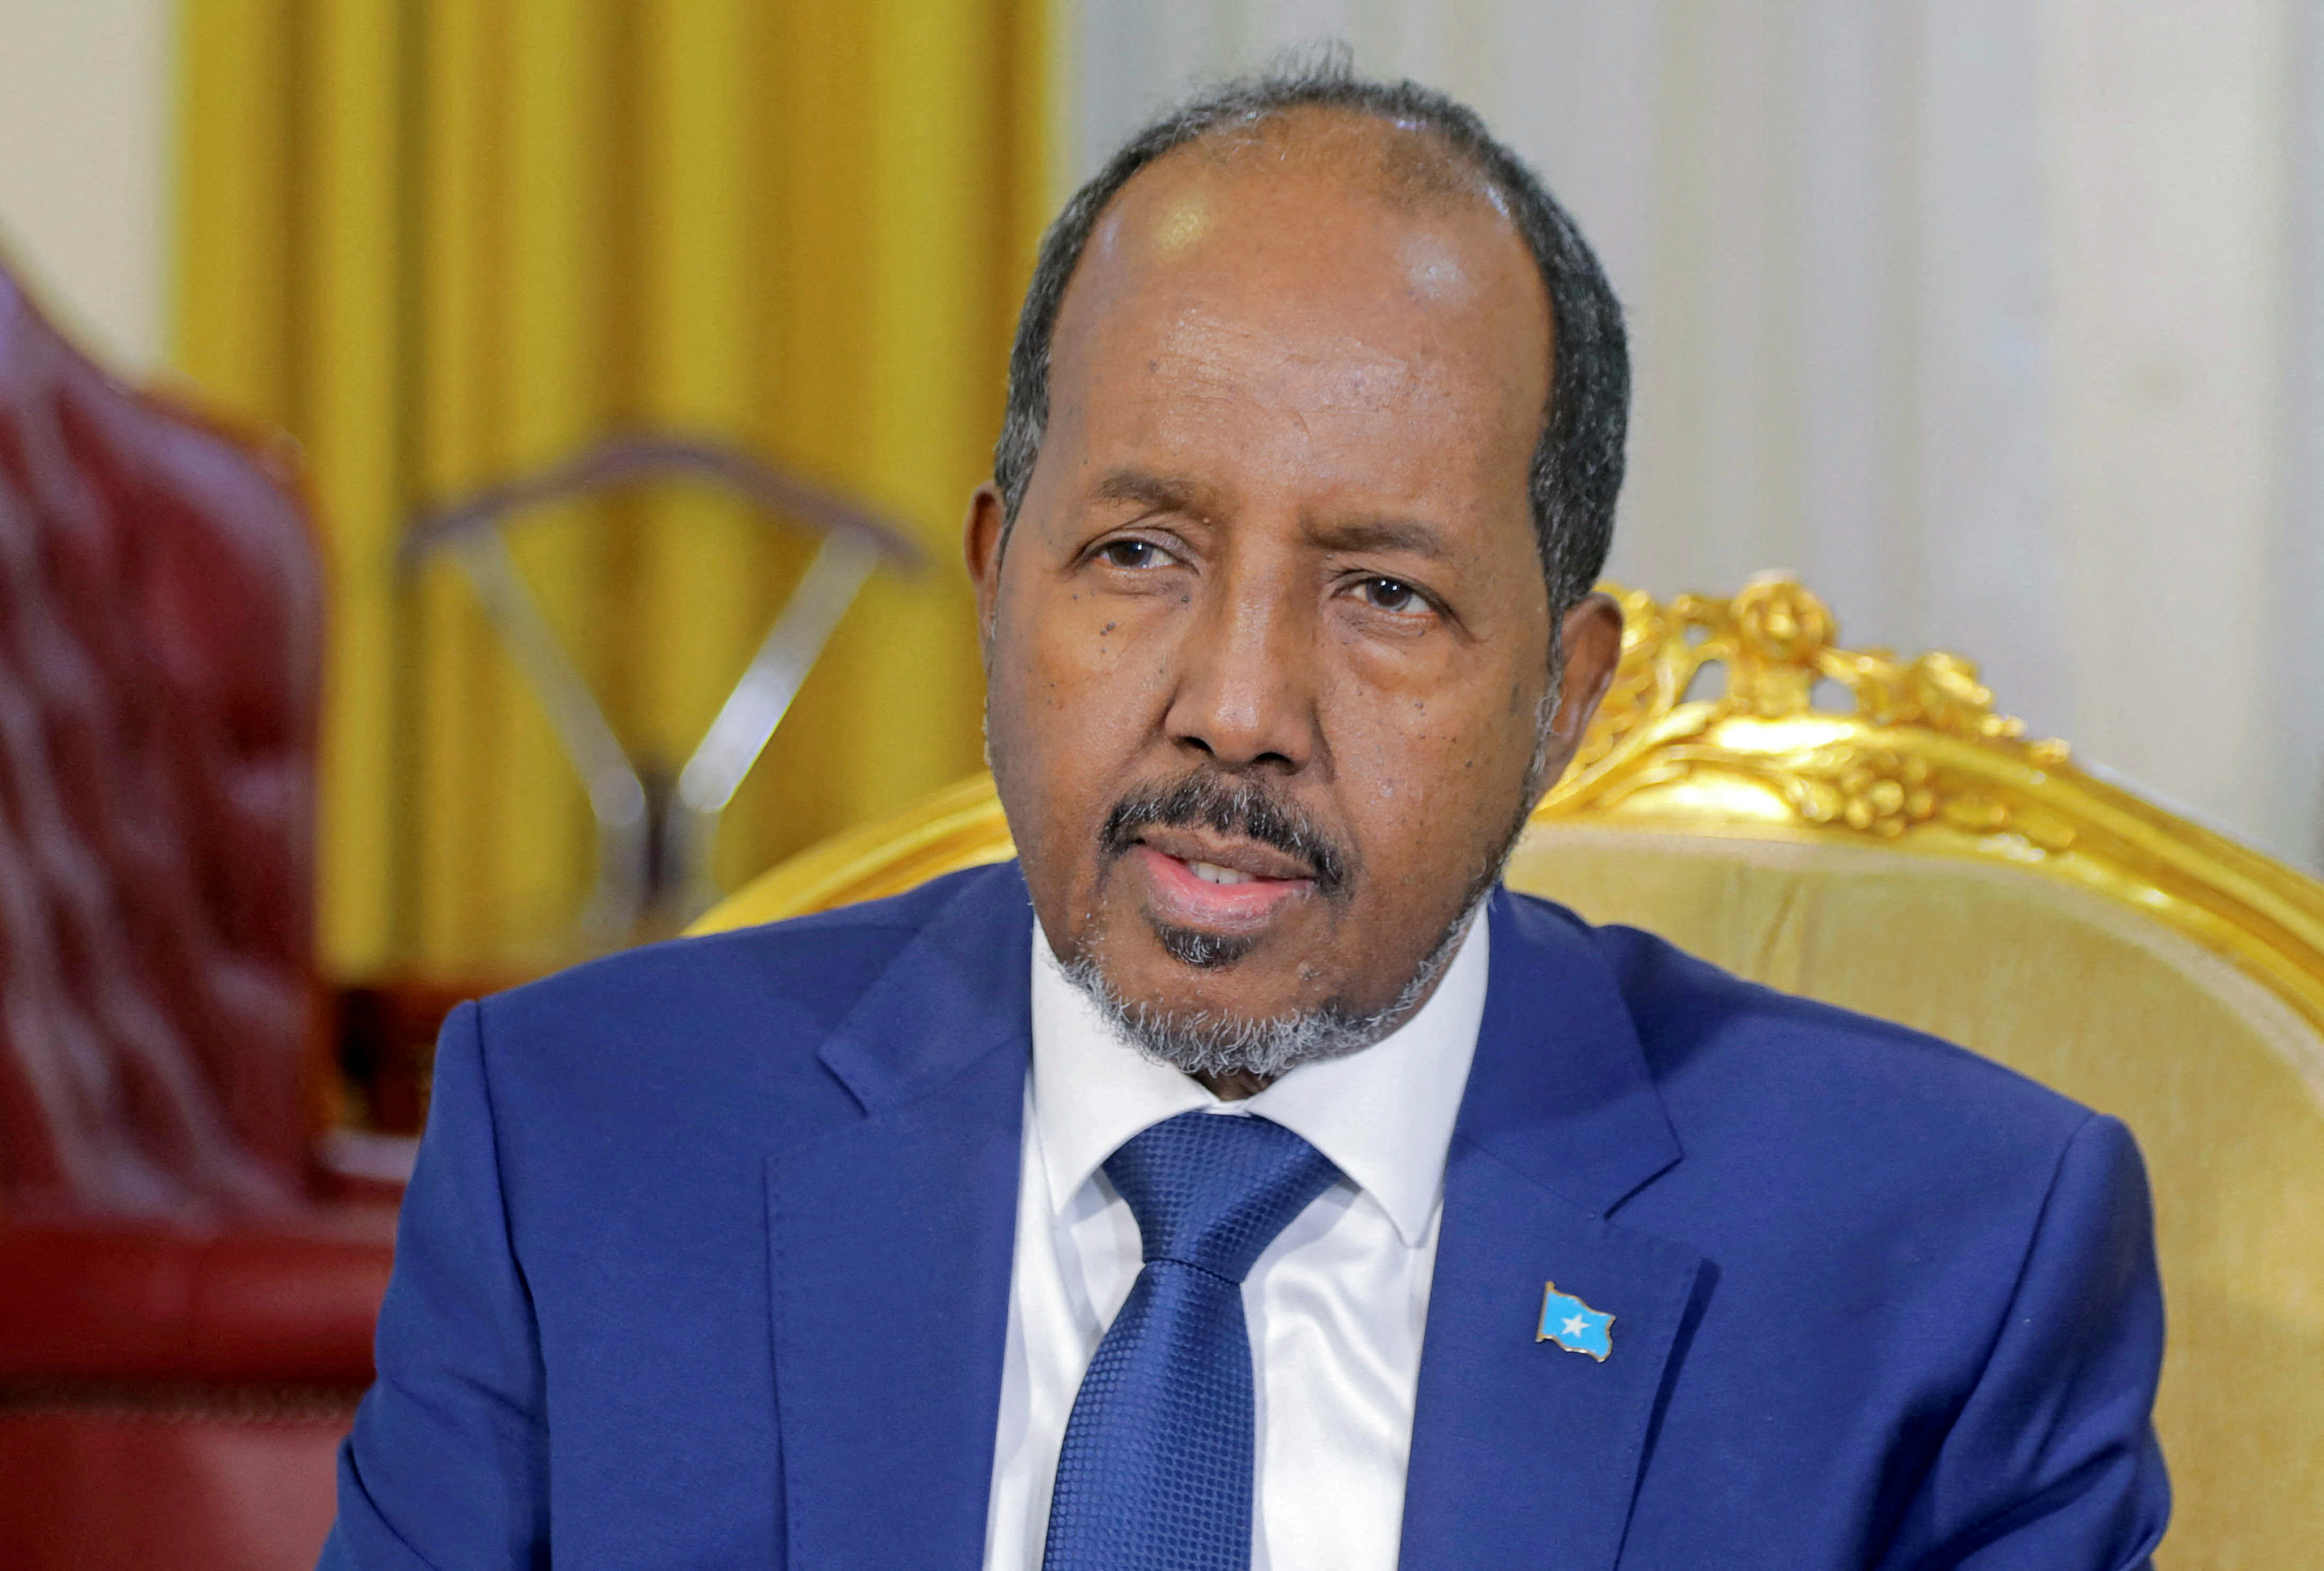 Somalia's President Hassan Sheikh Mohamud speaks during a Reuters interview in Mogadishu